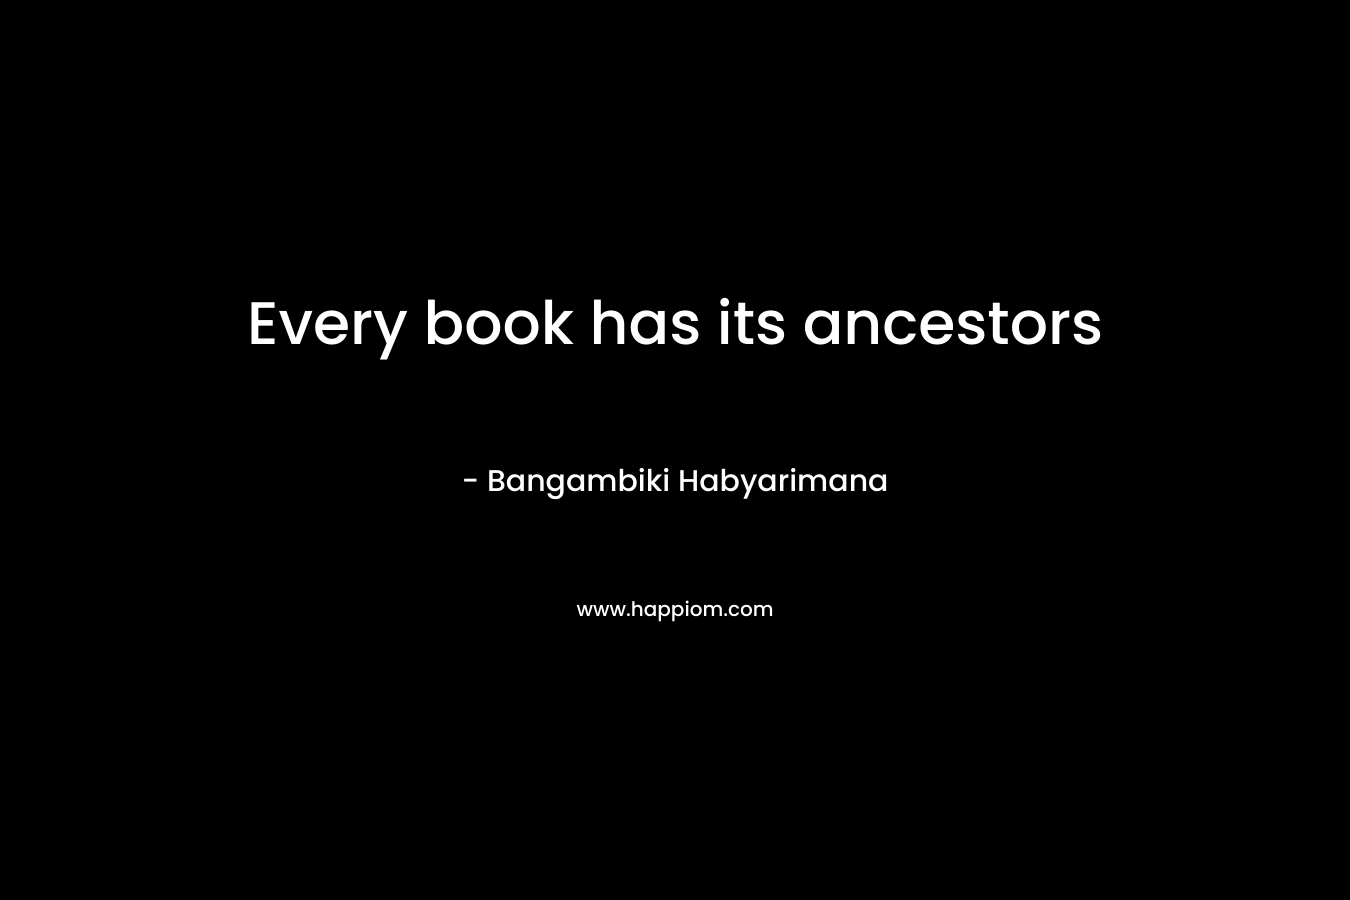 Every book has its ancestors